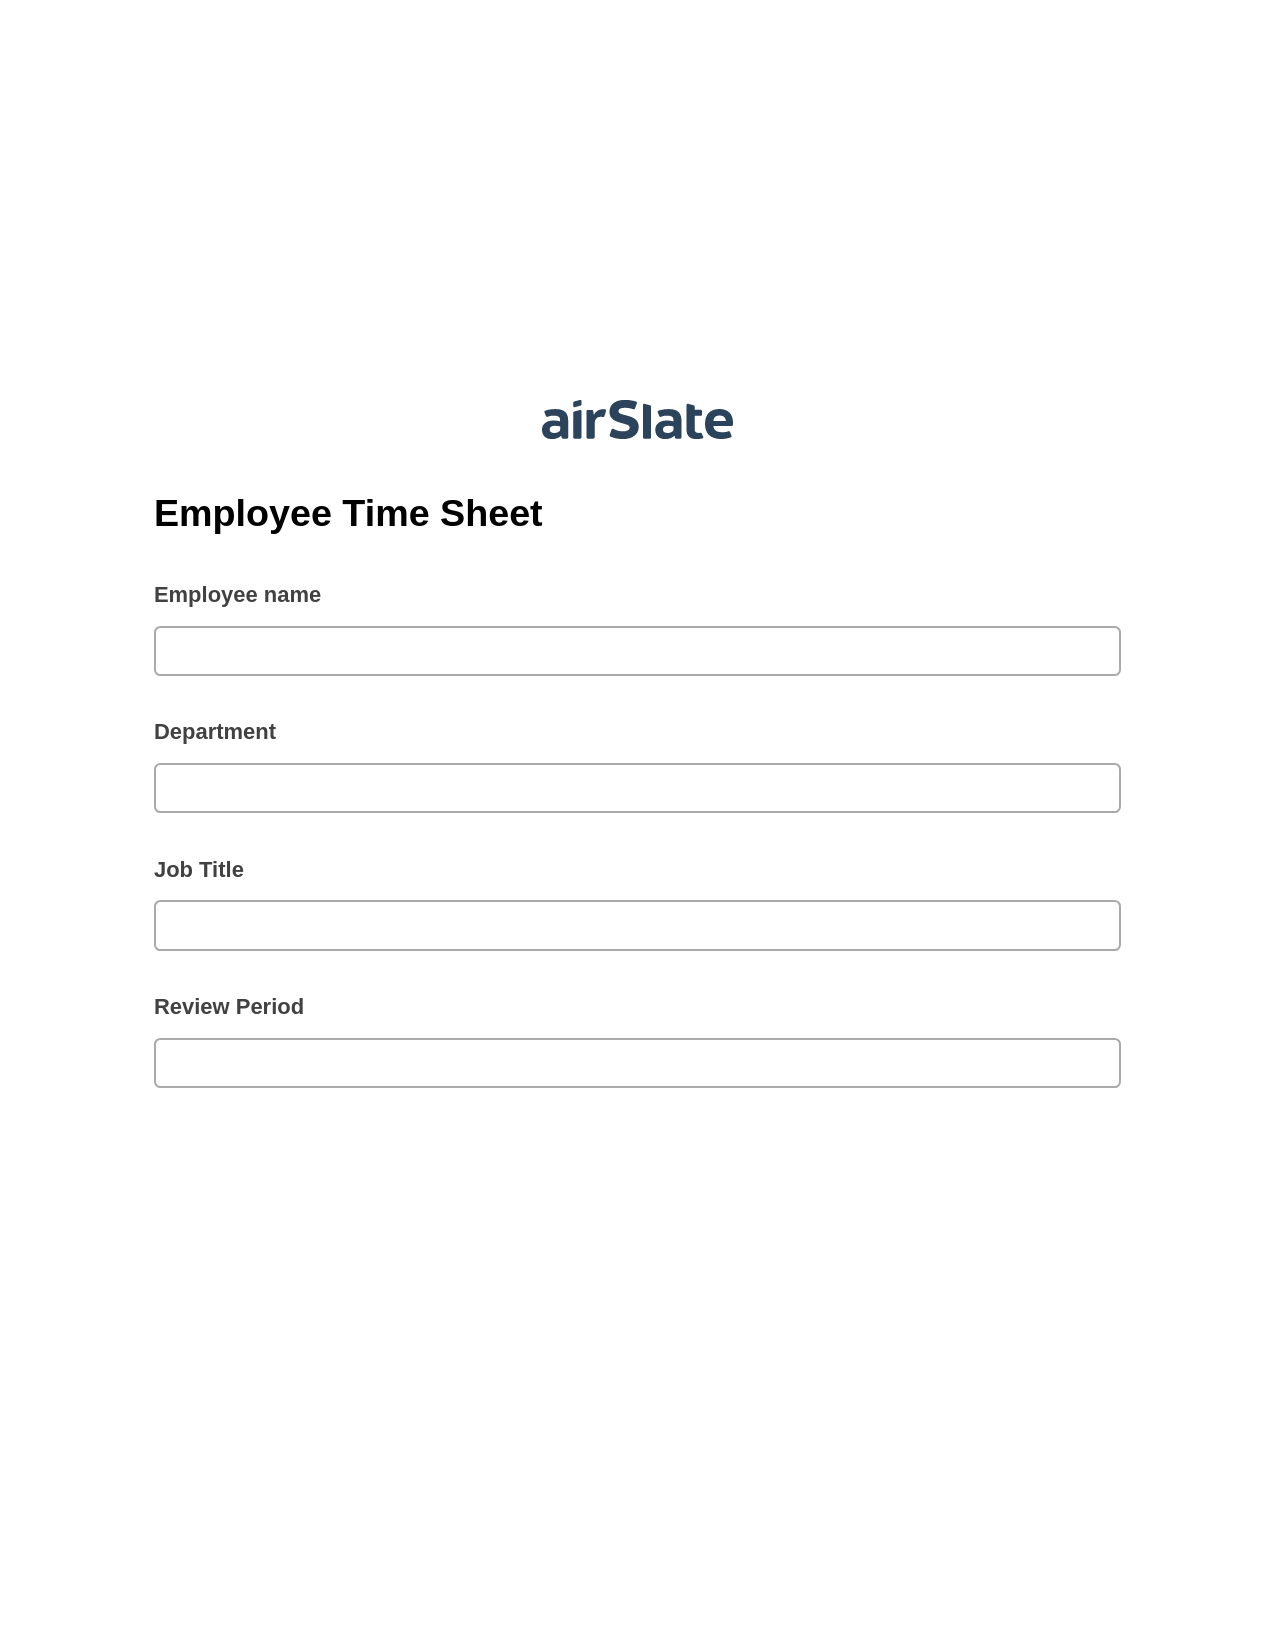 Employee Time Sheet Pre-fill from another Slate Bot, Create Salesforce Records Bot, Export to WebMerge Bot